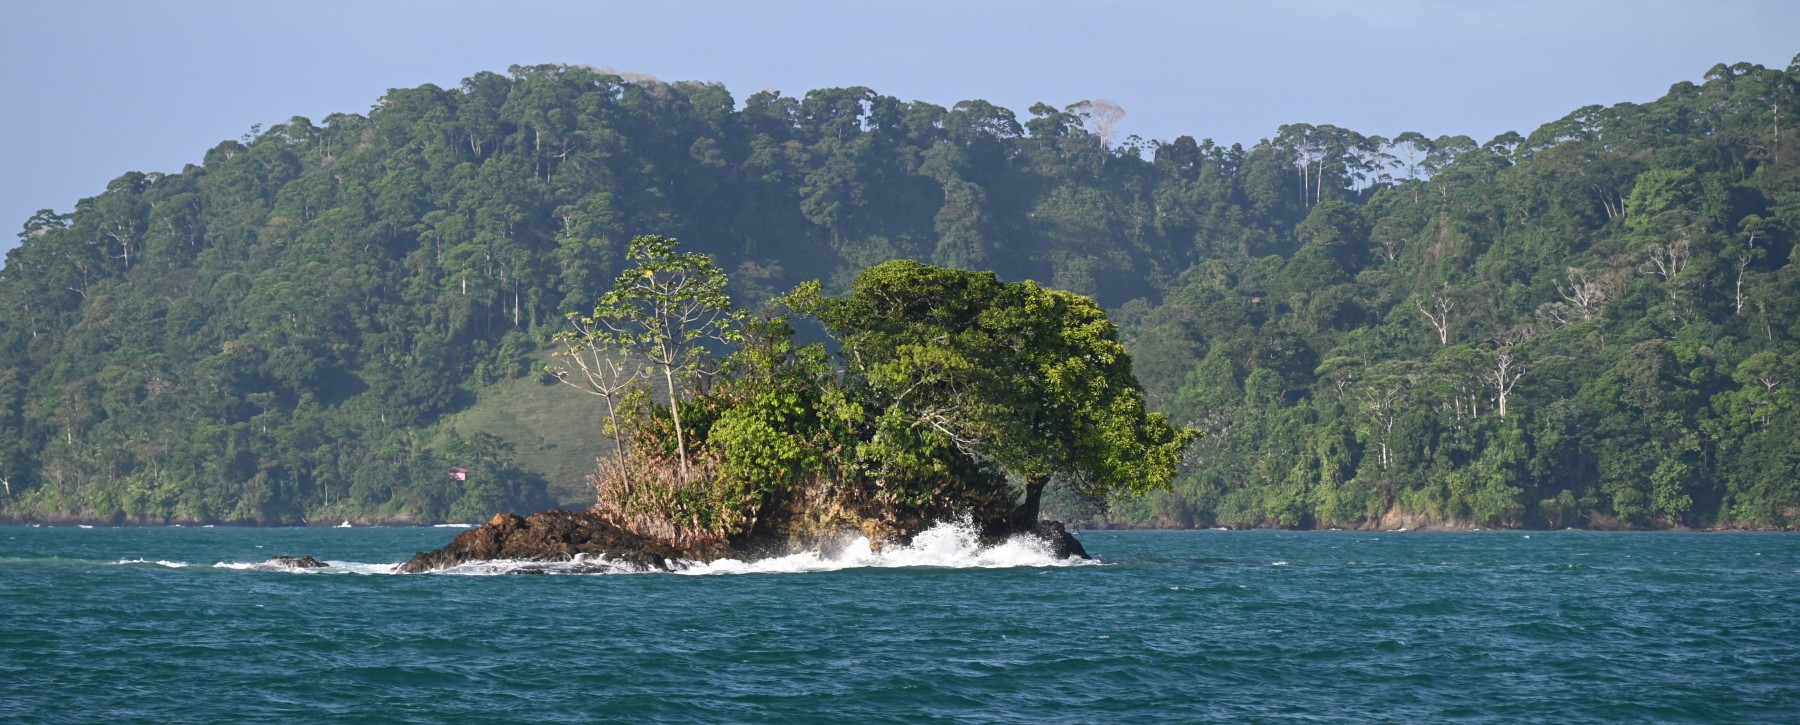 Islet at the entrance of Blue Fields Bay, Panama